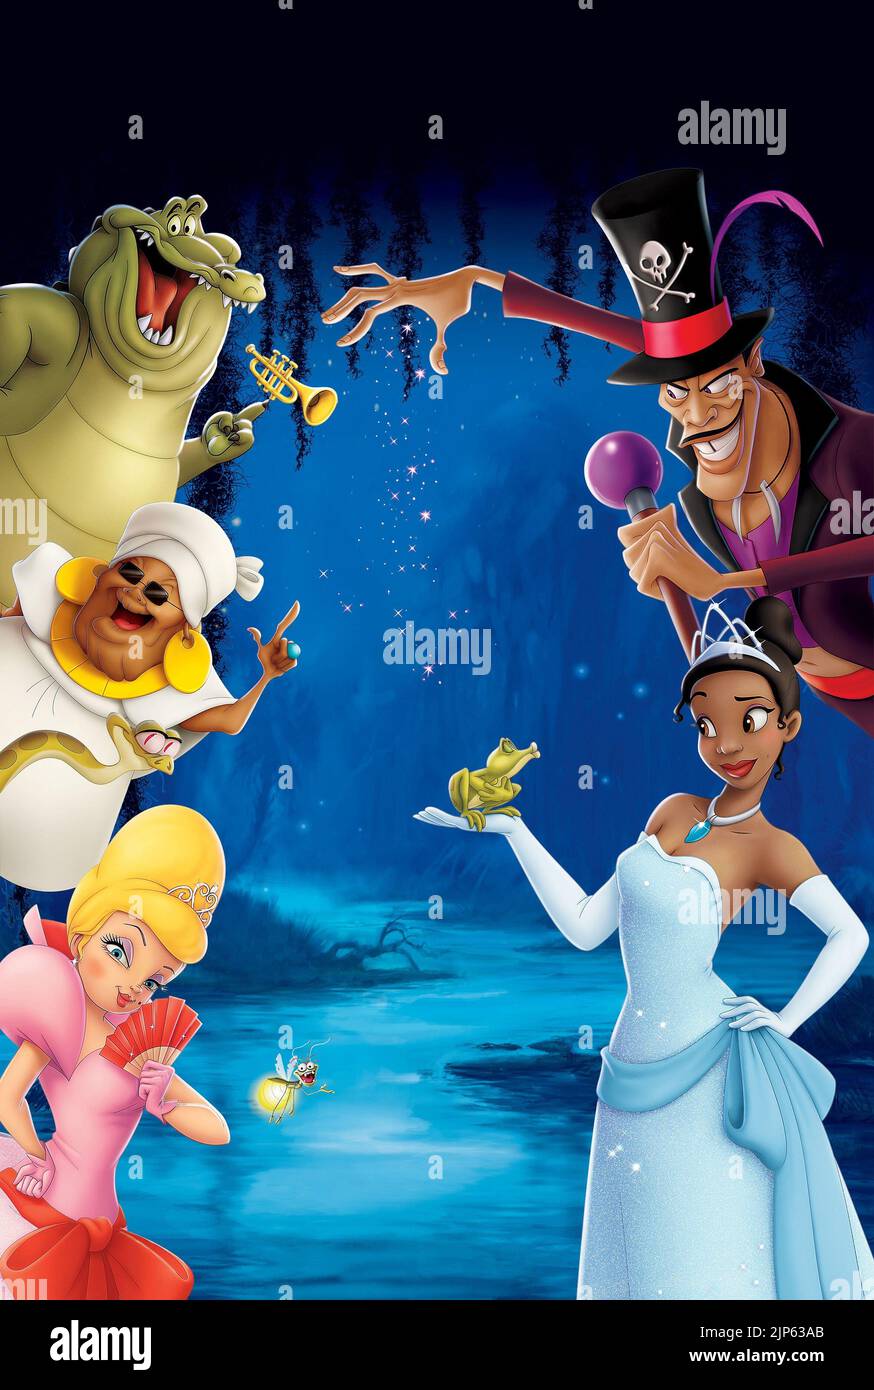 LOUIS, DOCTOR FACILIER, MAMA ODIE, PRINCESS TIANA, FROG NAVEEN, THE PRINCESS AND THE FROG, 2009 Stock Photo